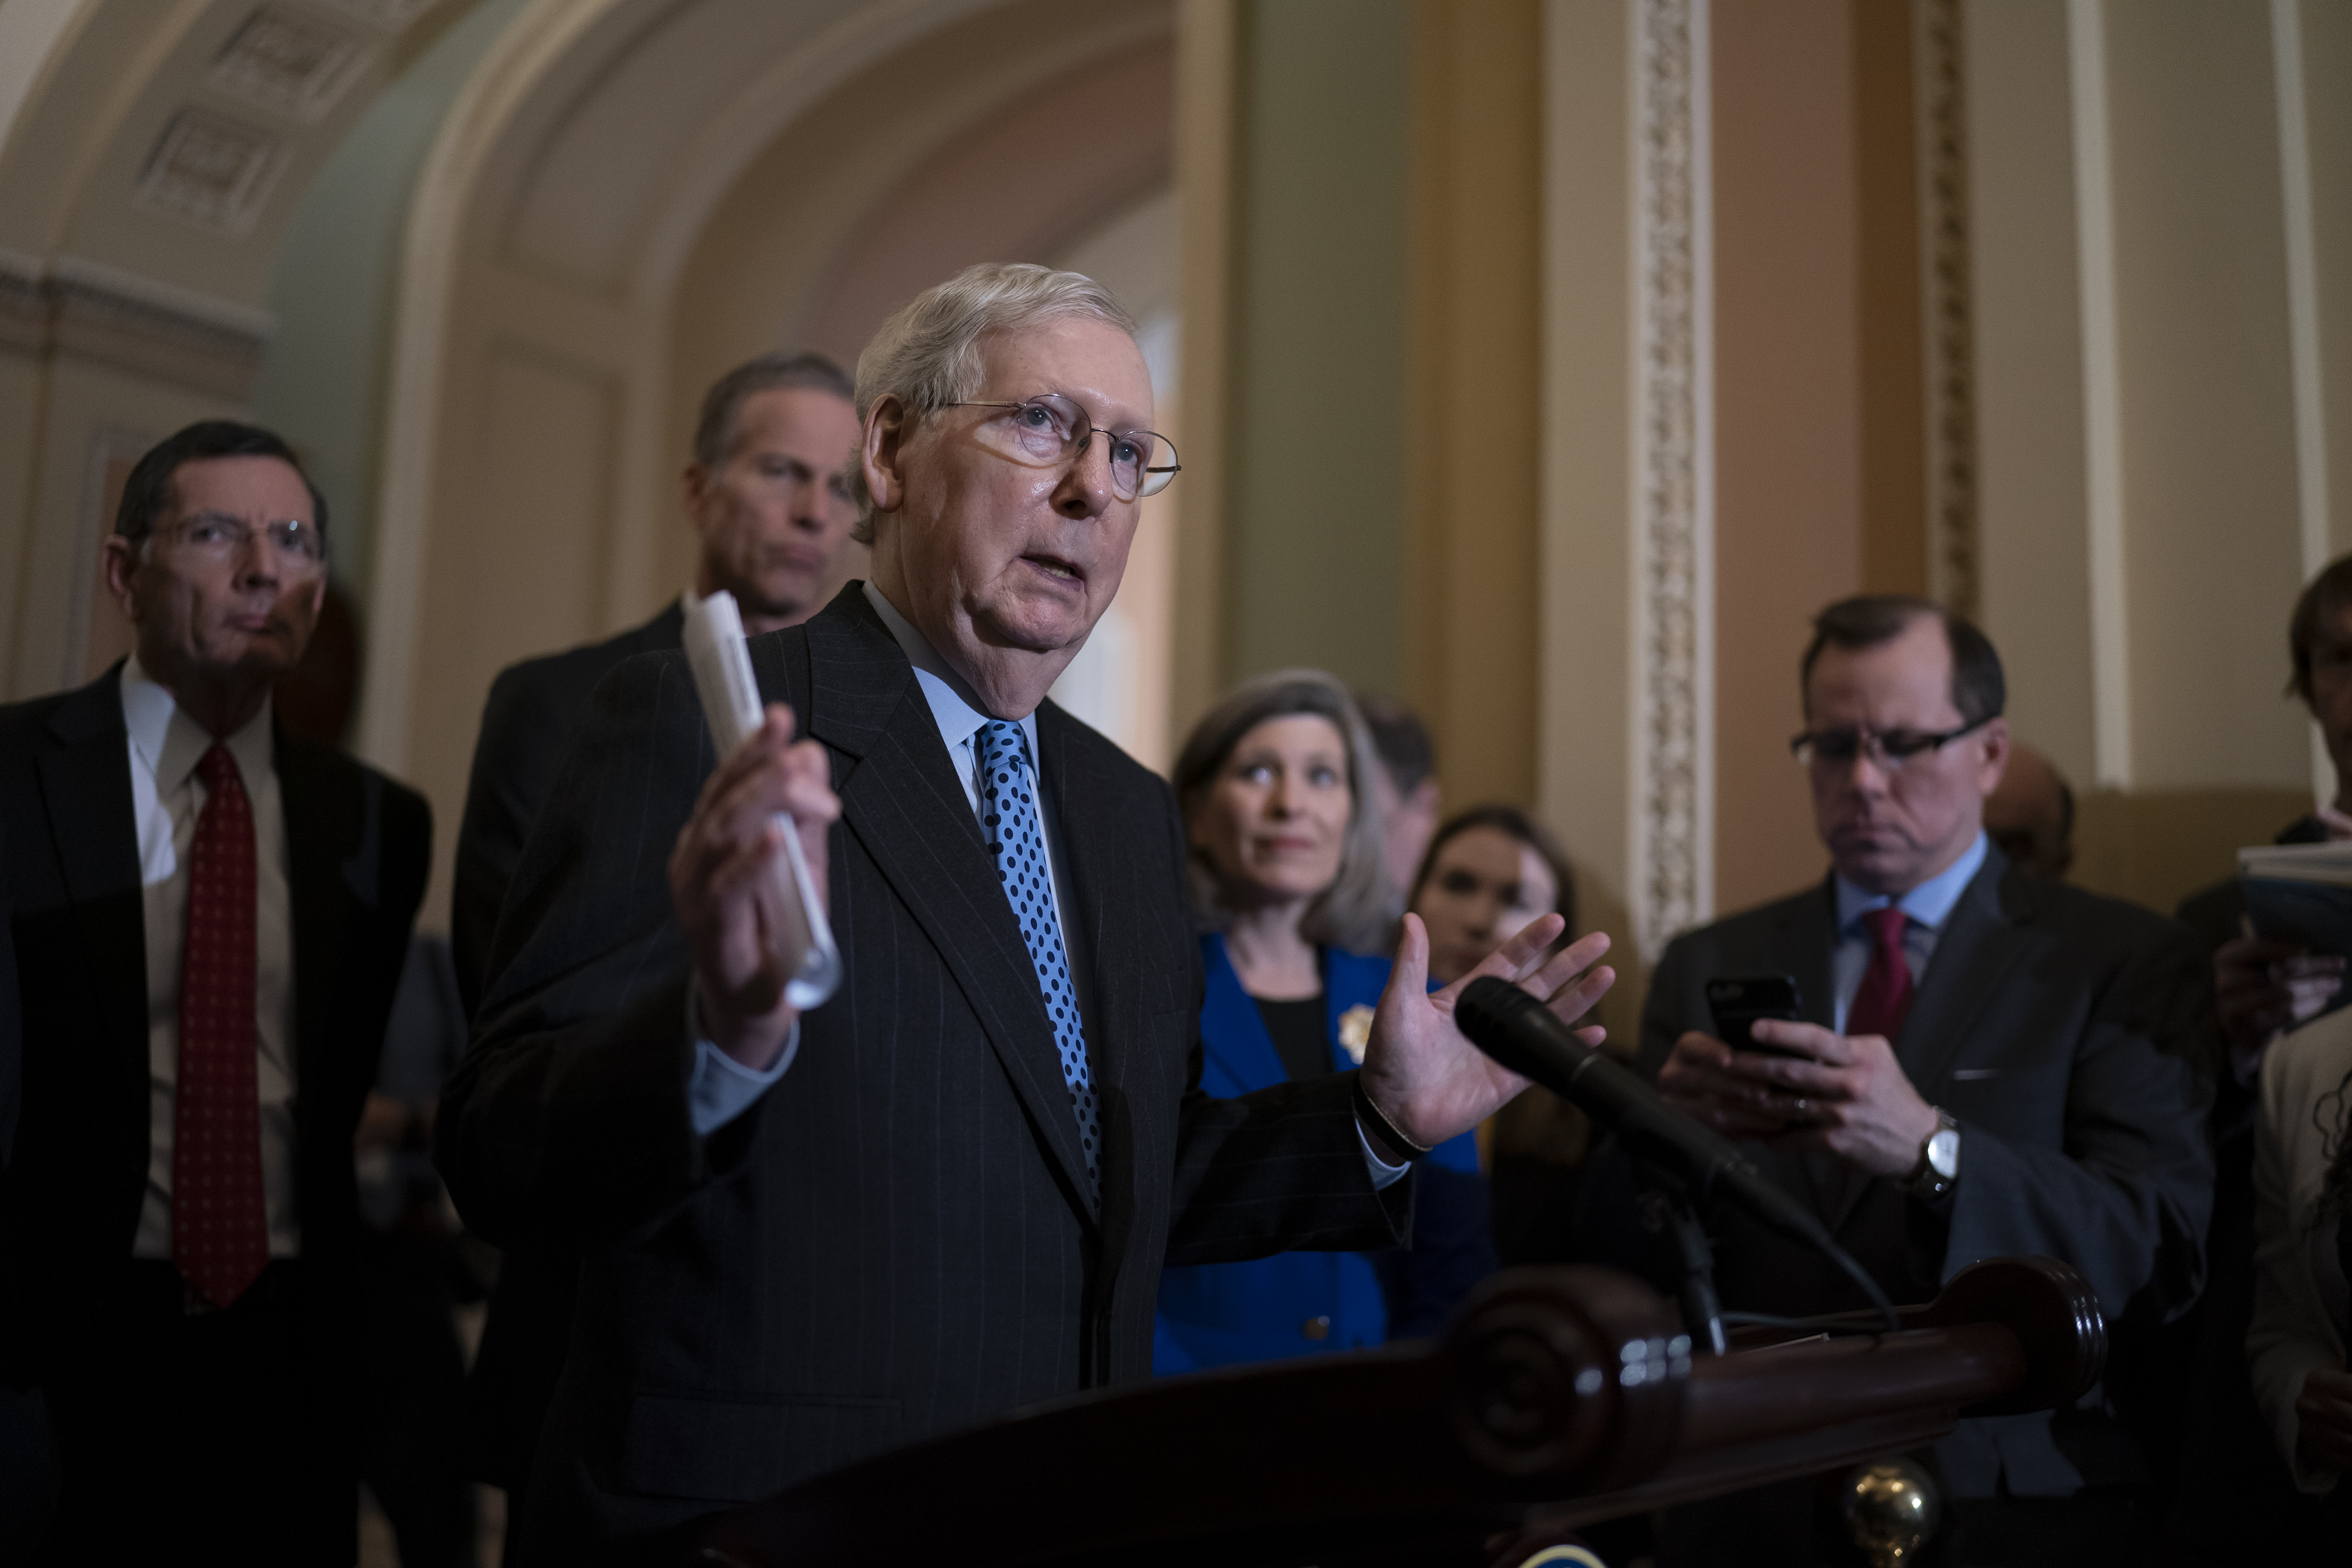 Senate Majority Leader Mitch McConnell, R-Ky., joined by, from left, Sen. John Barrasso, R-Wyo., Majority Whip John Thune, R-S.D., and Sen. Joni Ernst, R-Iowa, talks to reporters following a GOP strategy meeting at the Capitol in Washington on Tuesday